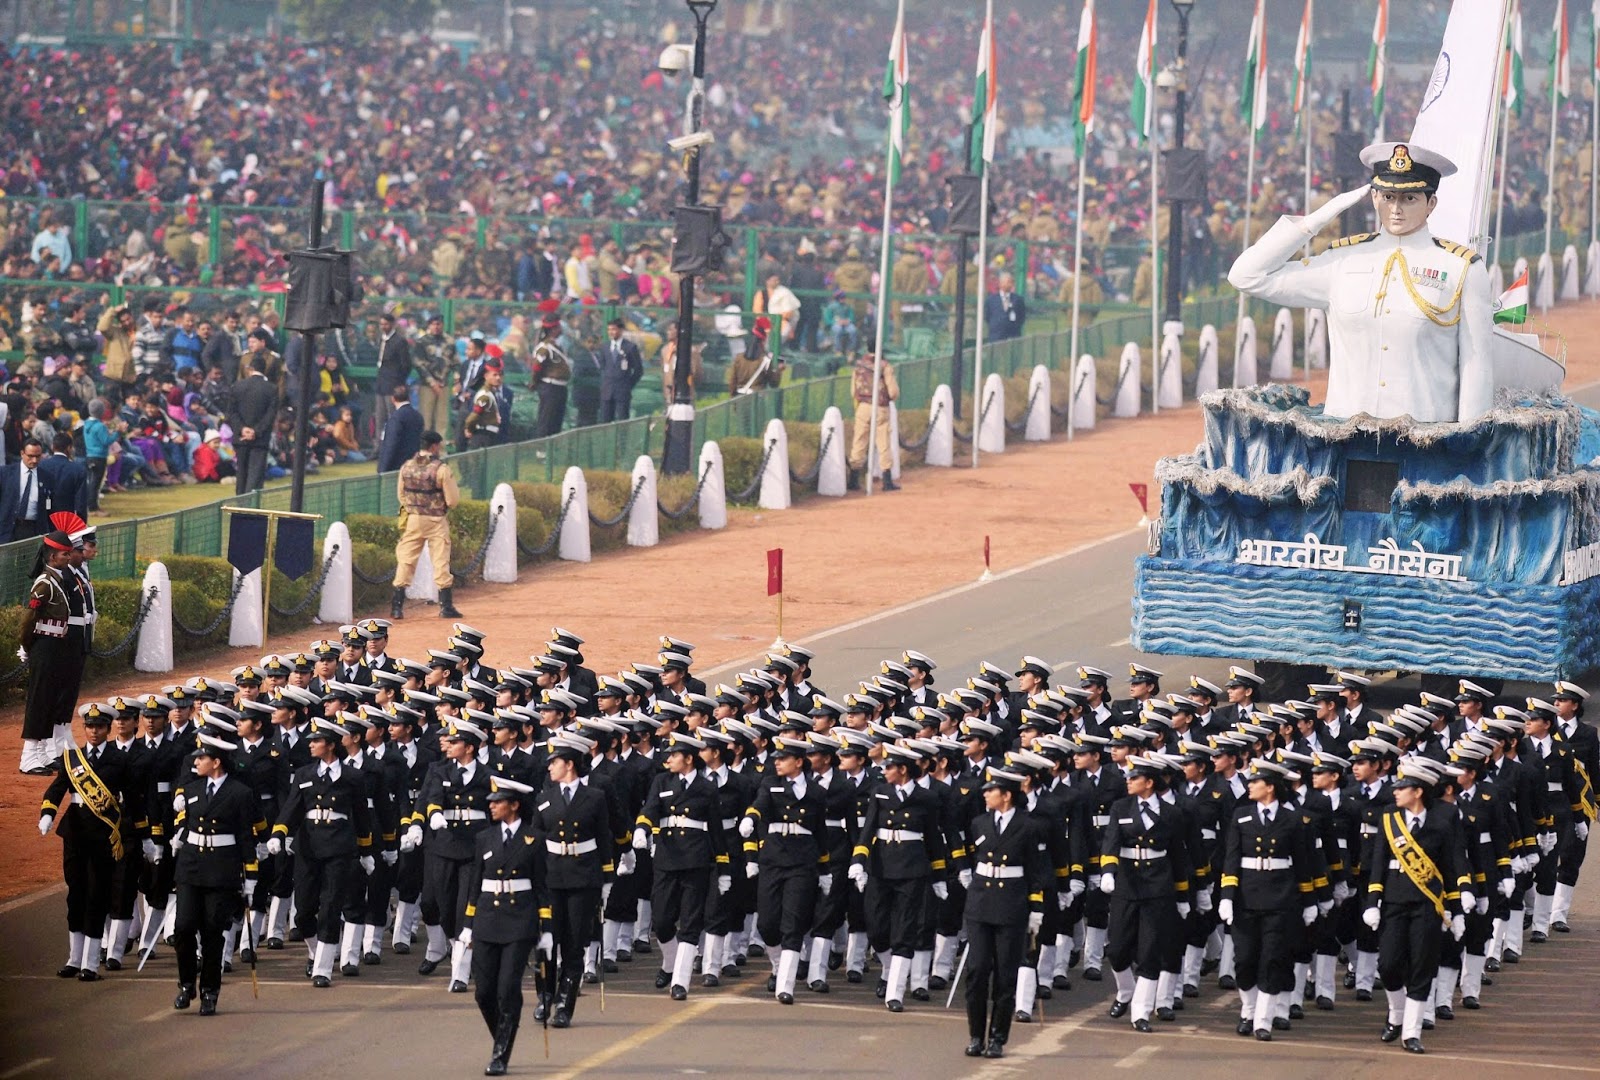 66th Republic Day of India on 26th Jan 2015 Pictures